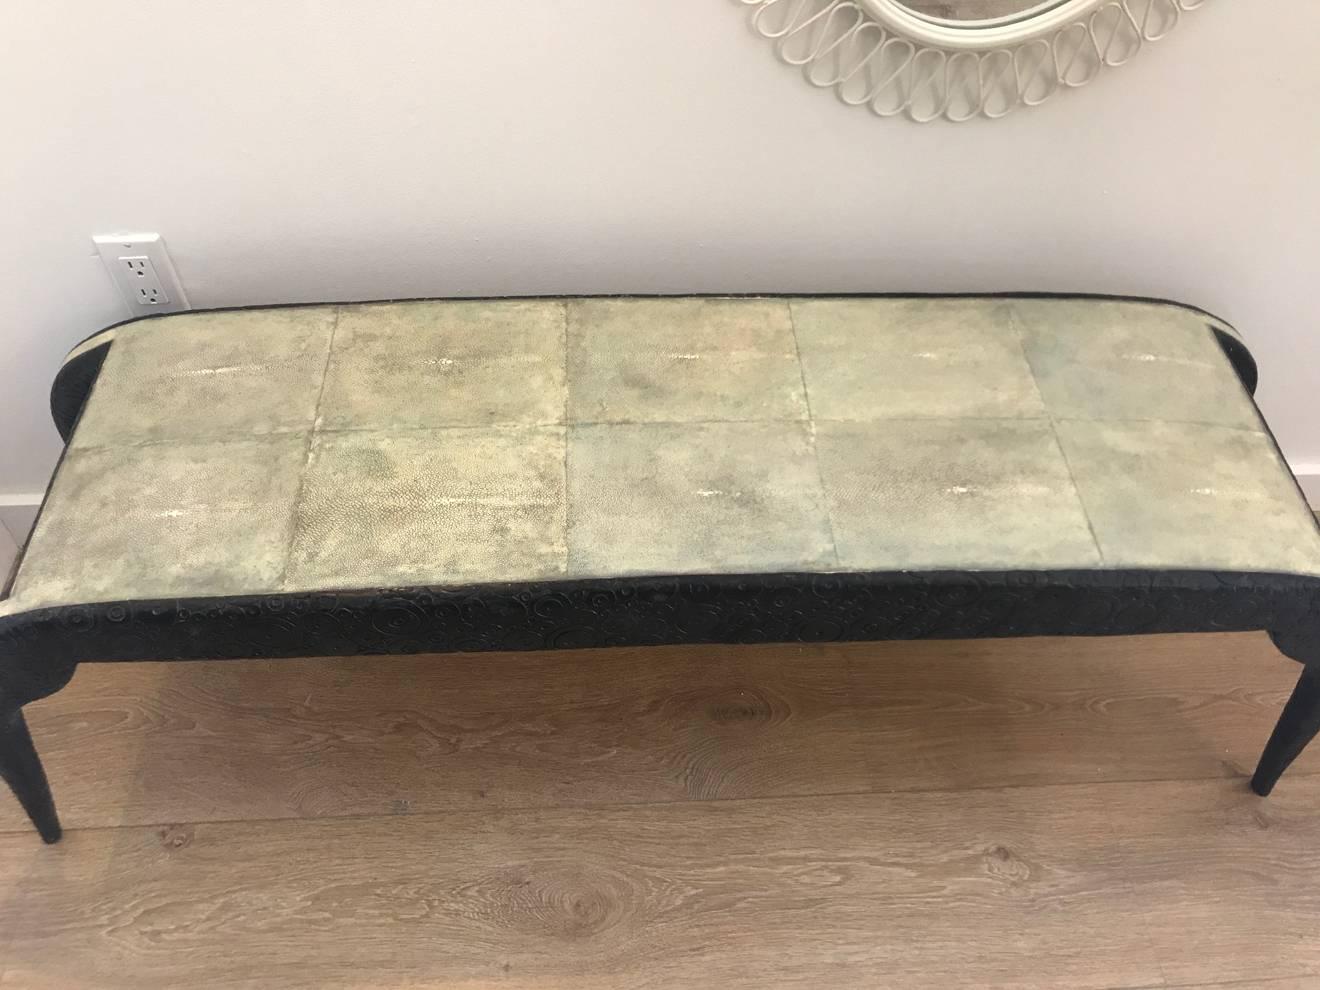 Pair of bronze and celadon shagreen benches, labeled R.Y Augousti Paris. Bronze base is executed with embossed and concentric circle detailing throughout. Reminiscent work of the Art Deco period.